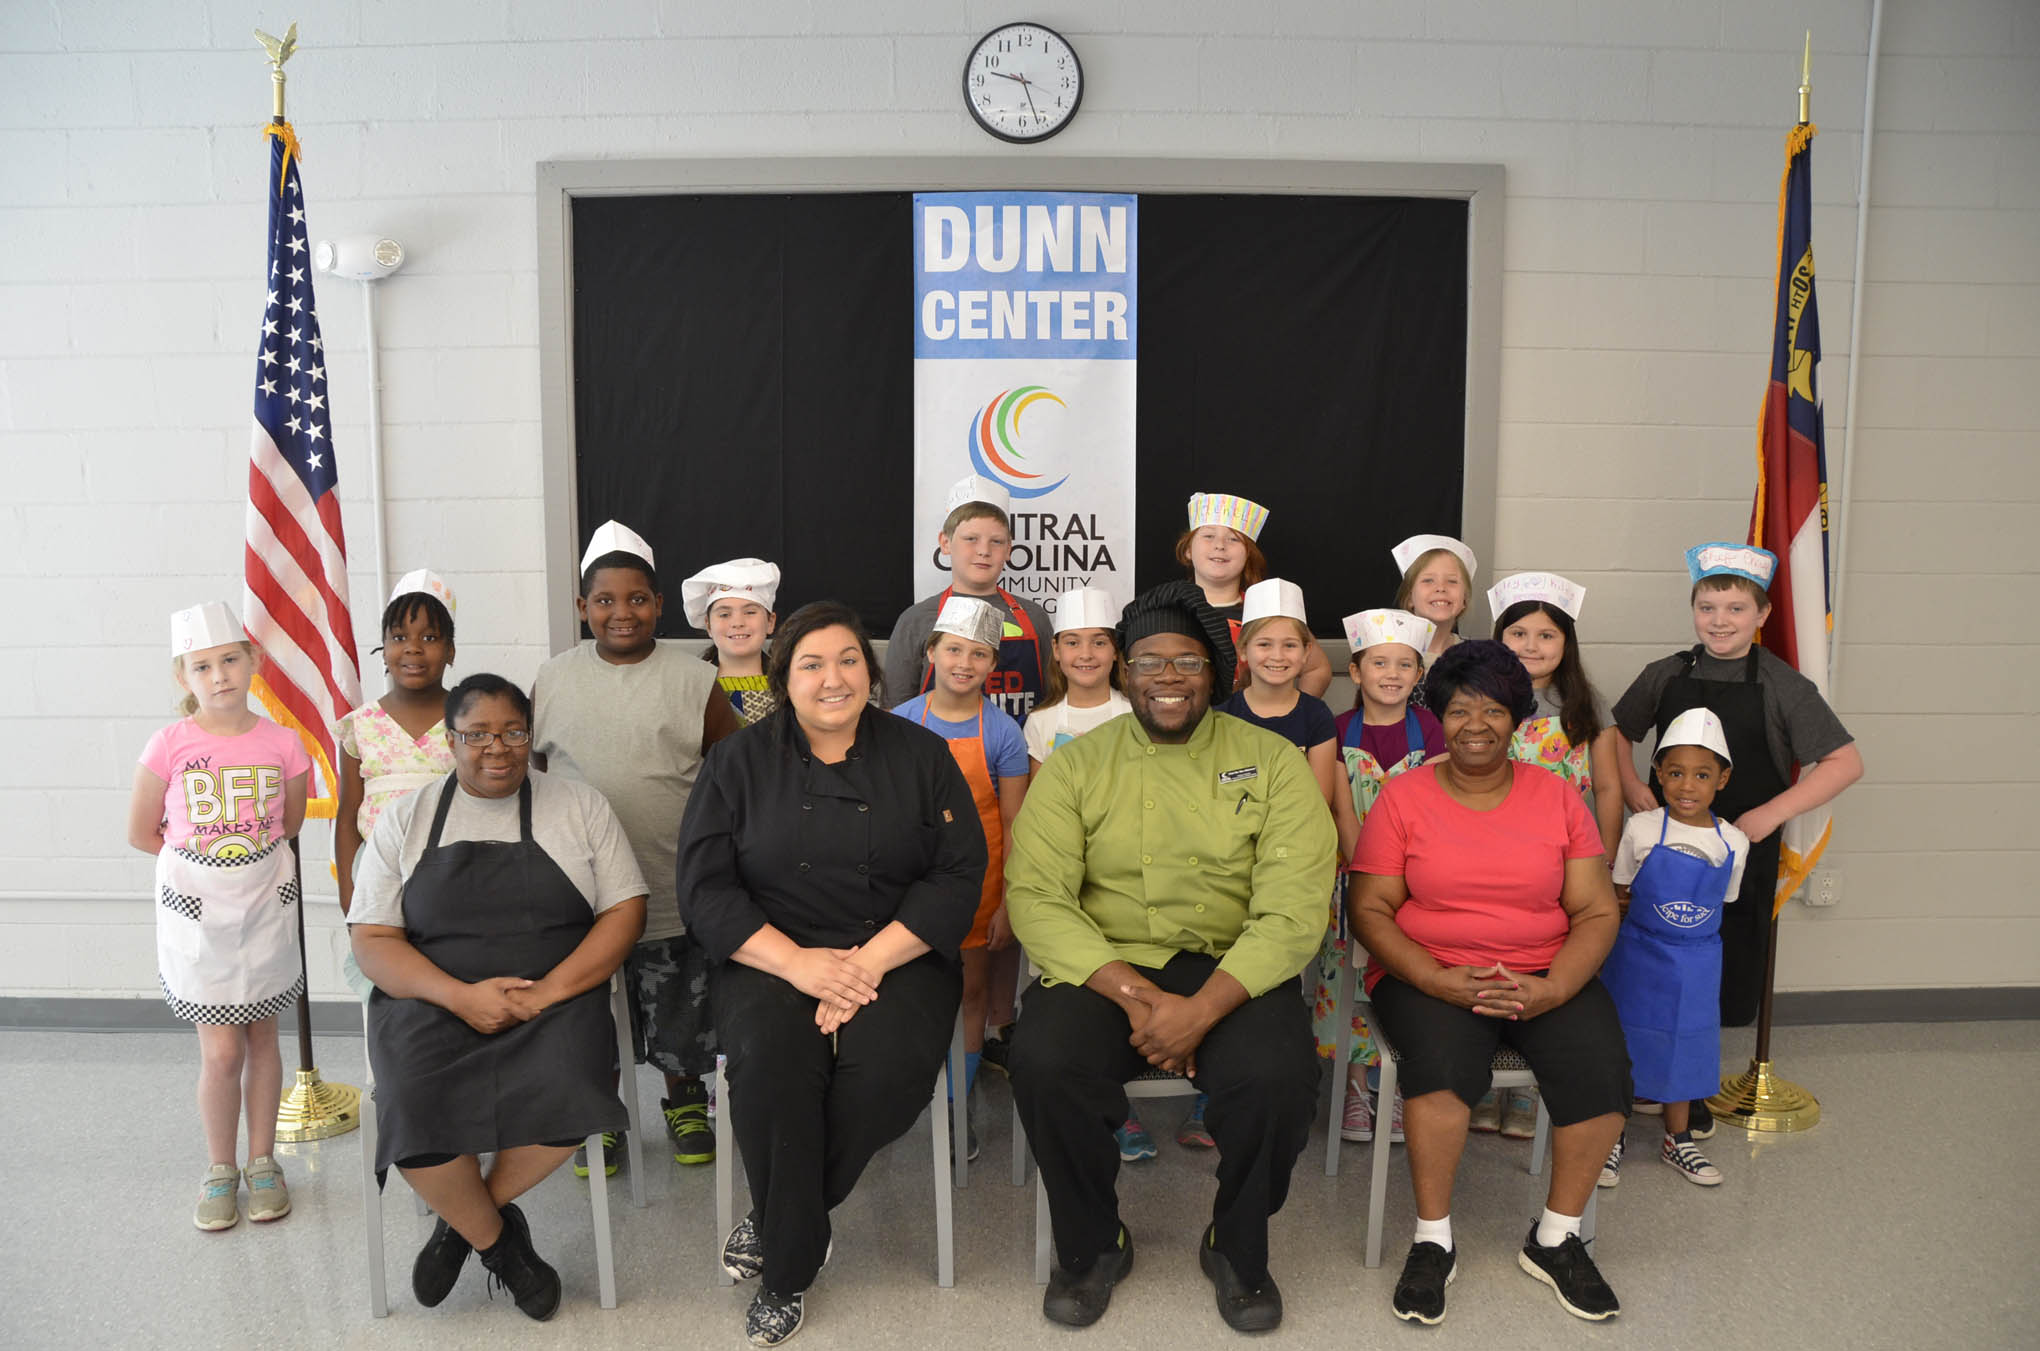 CCCC cooking camps allow kids to create